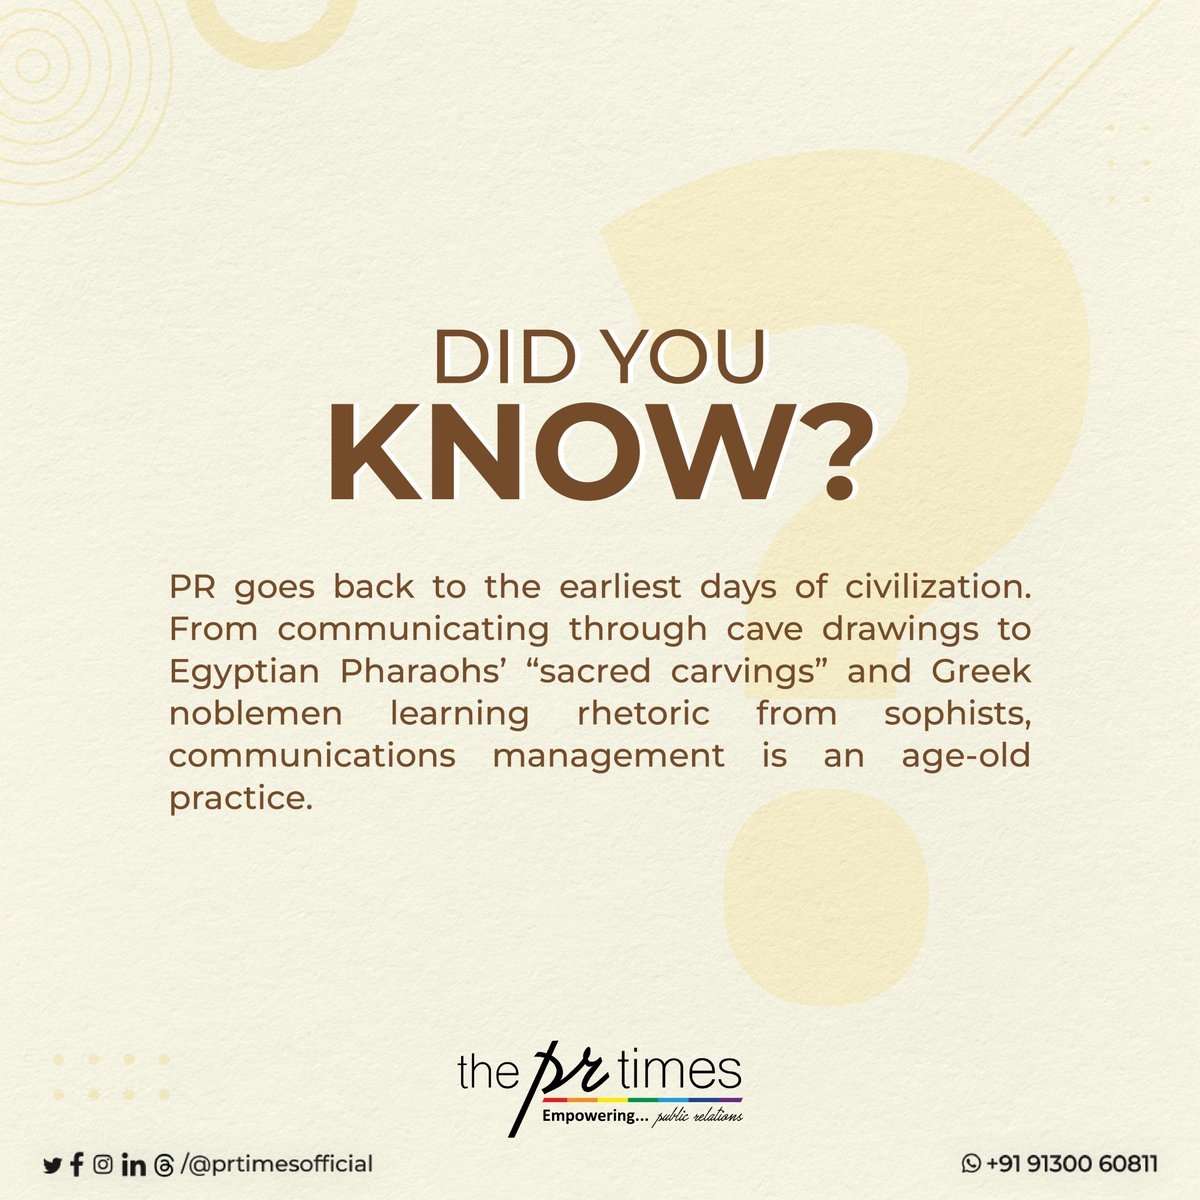 Throughout the transition from civilization to digitalization, communication has consistently held its place as an indispensable element of Public Relations. Elevate your PR efforts and distinguish yourself with our expert services.
#DidYouKnow #PRFacts #AboutPR #PRServices